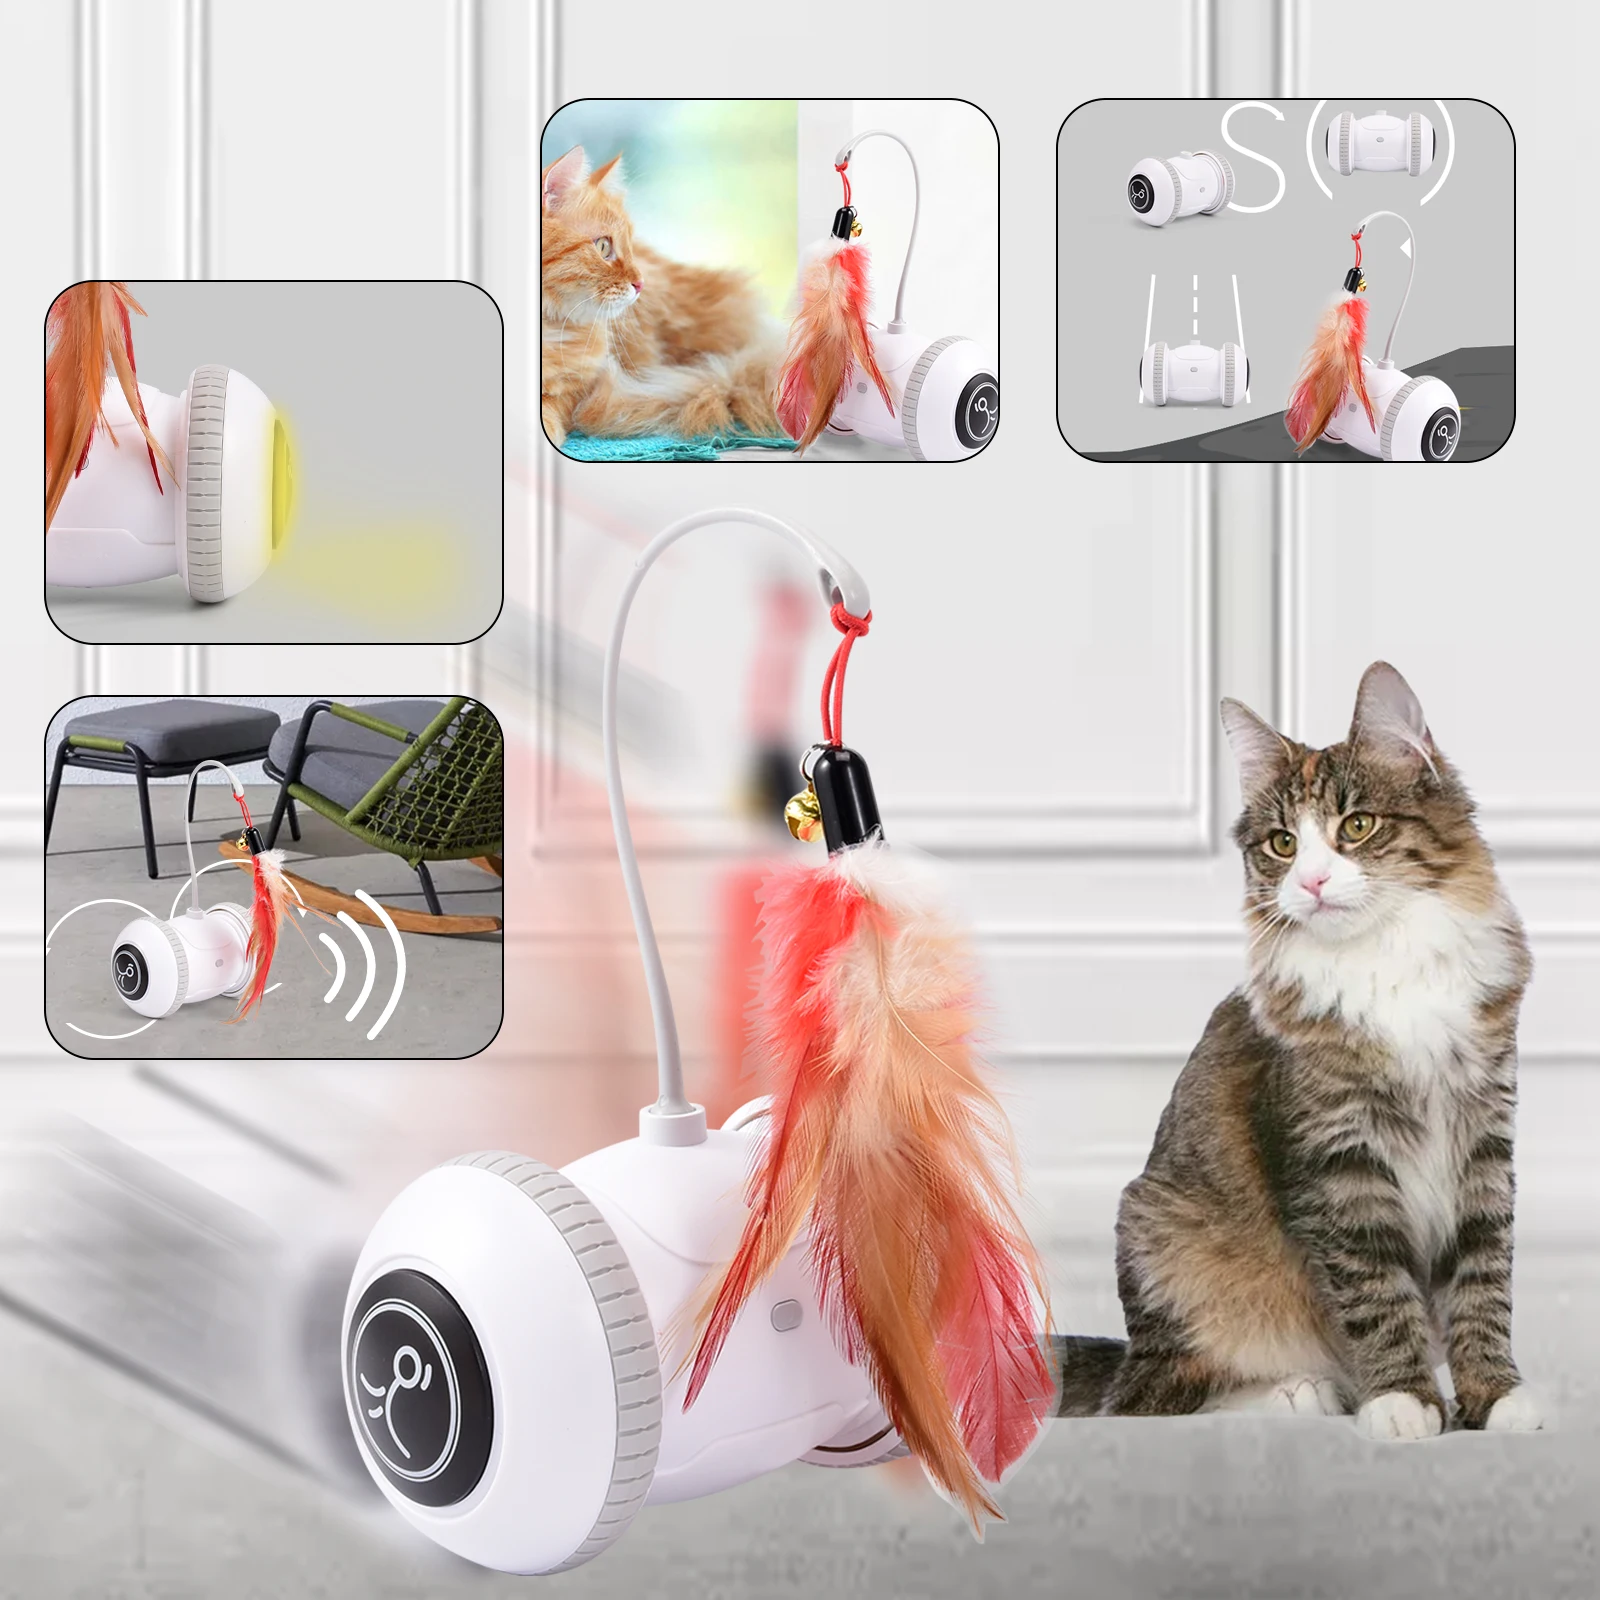 Automatic Sensor Cat Toys Interactive Smart Robotic Electronic Feather Teaser Self-Playing USB Rechargeable Kitten Toys for Pets